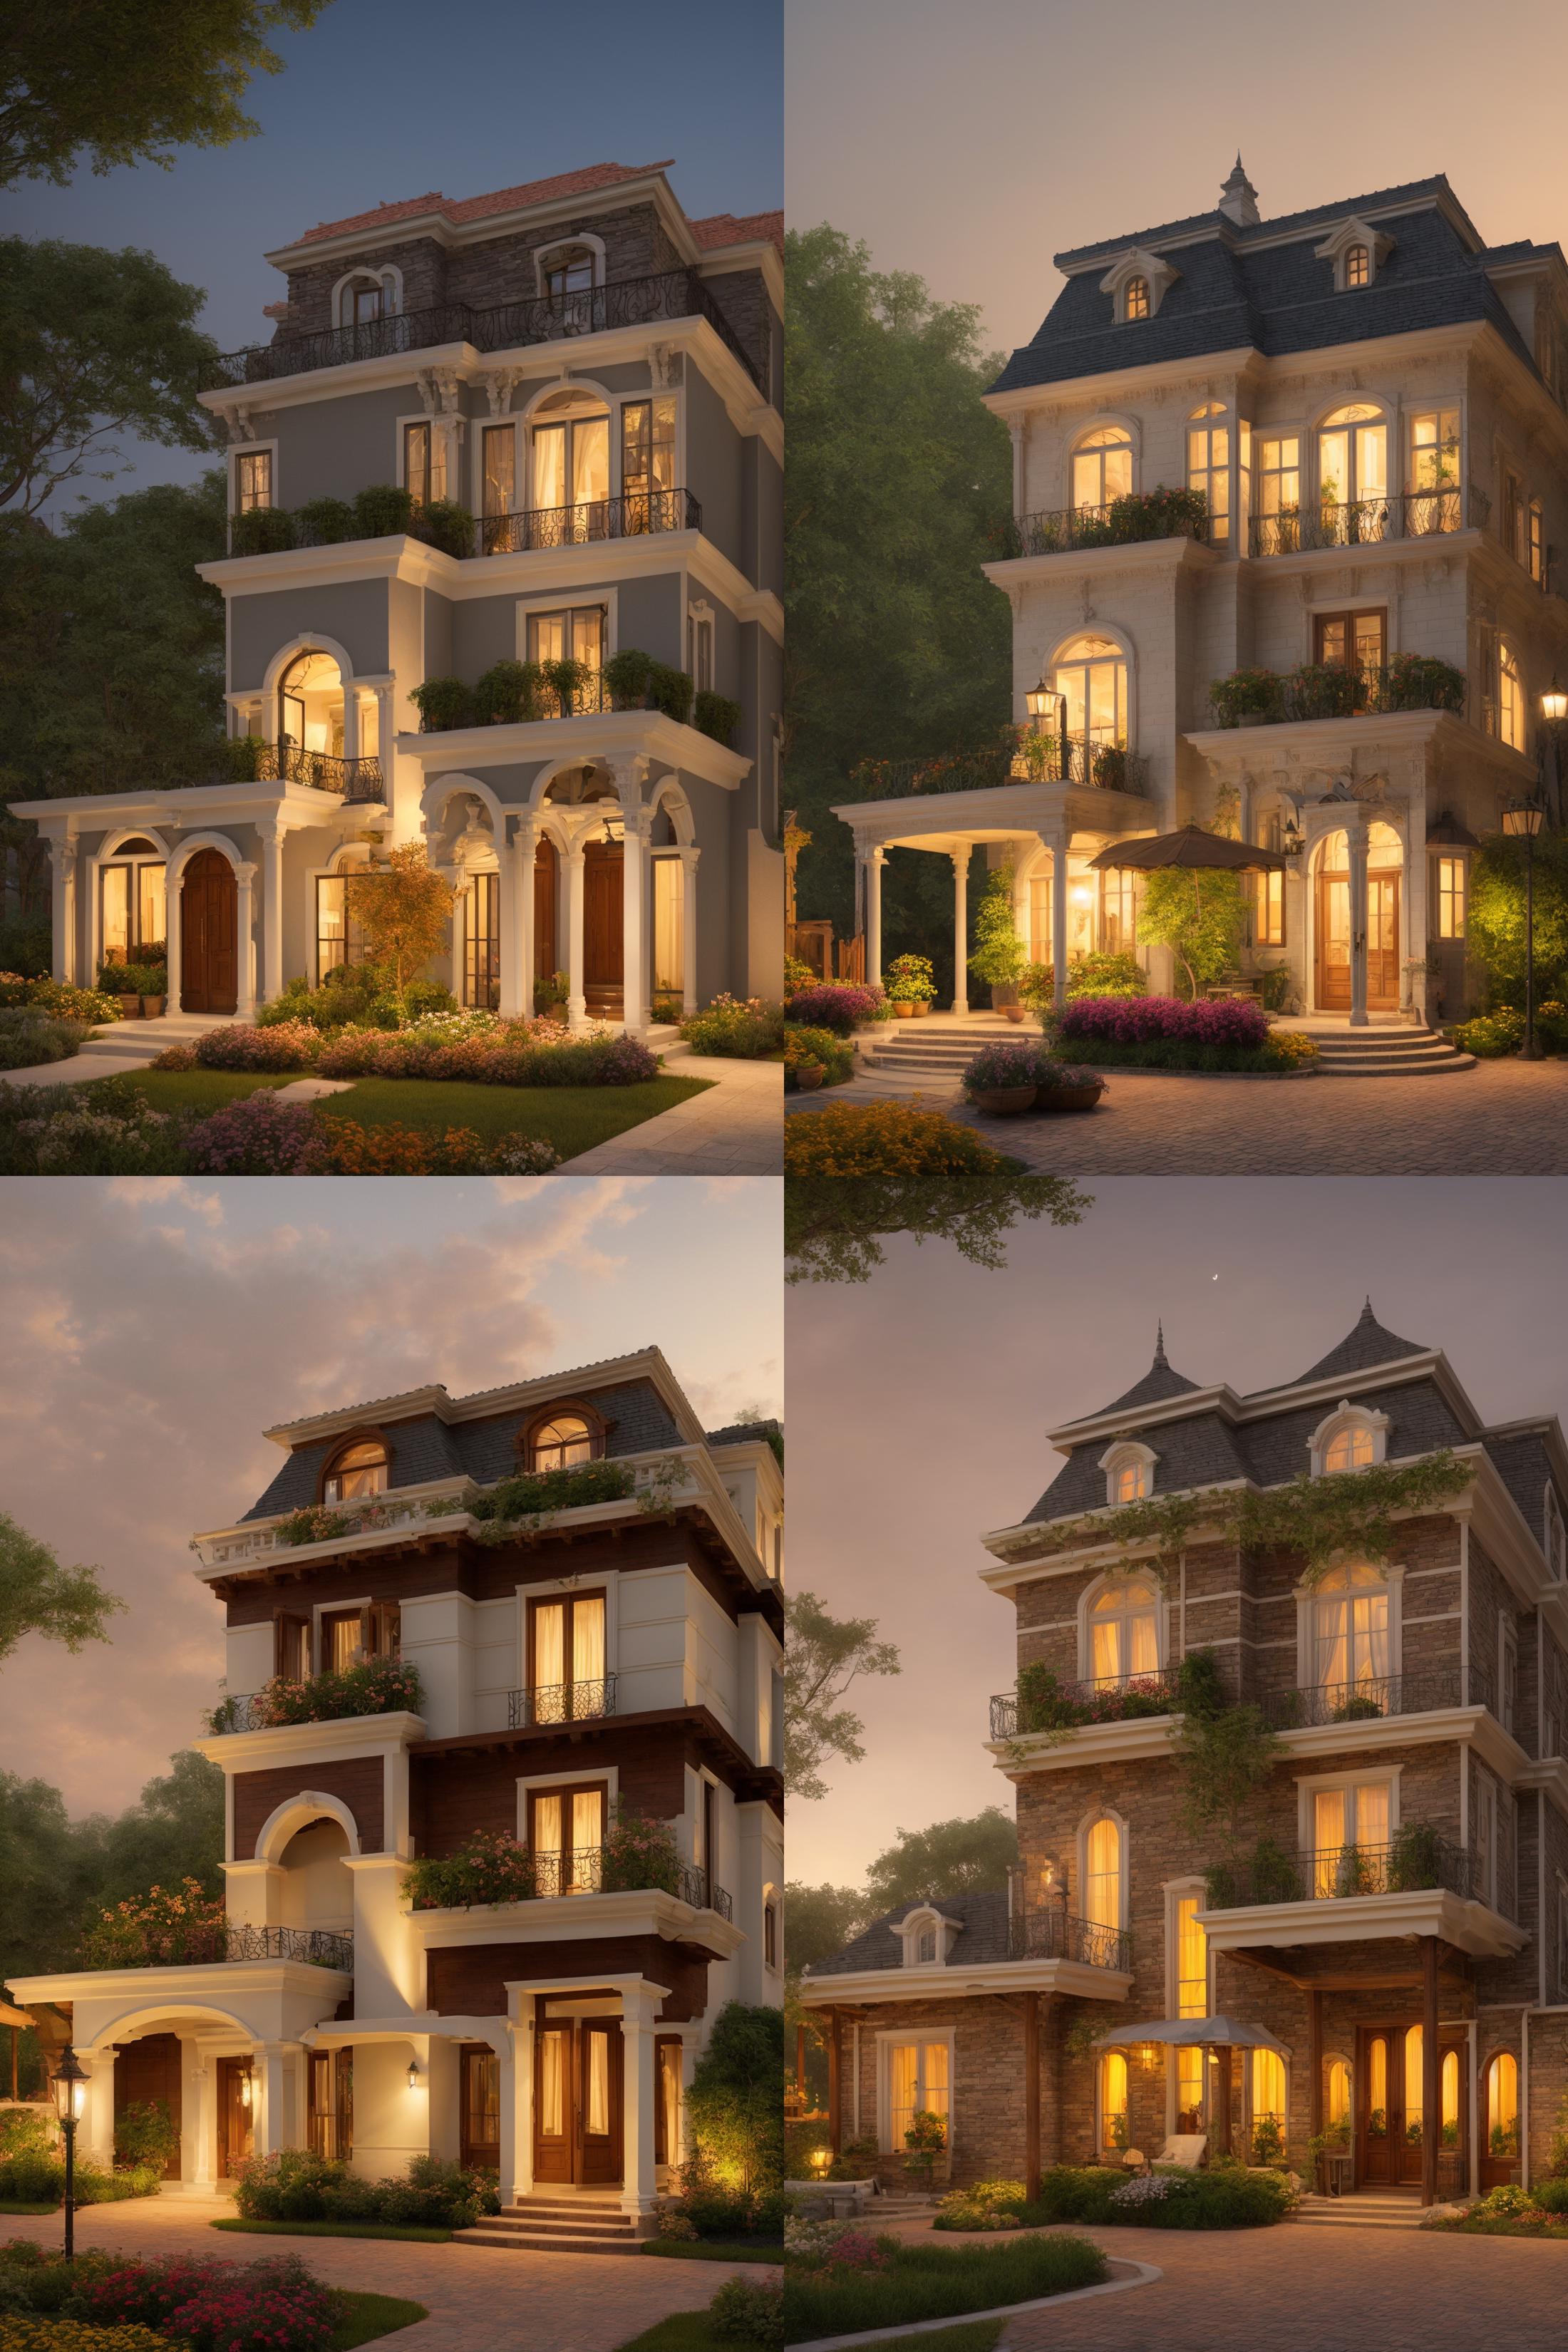 A series of three images depicting a large, well-lit house with multiple windows and balconies. The house is situated on a street with a lawn, and it is surrounded by trees.